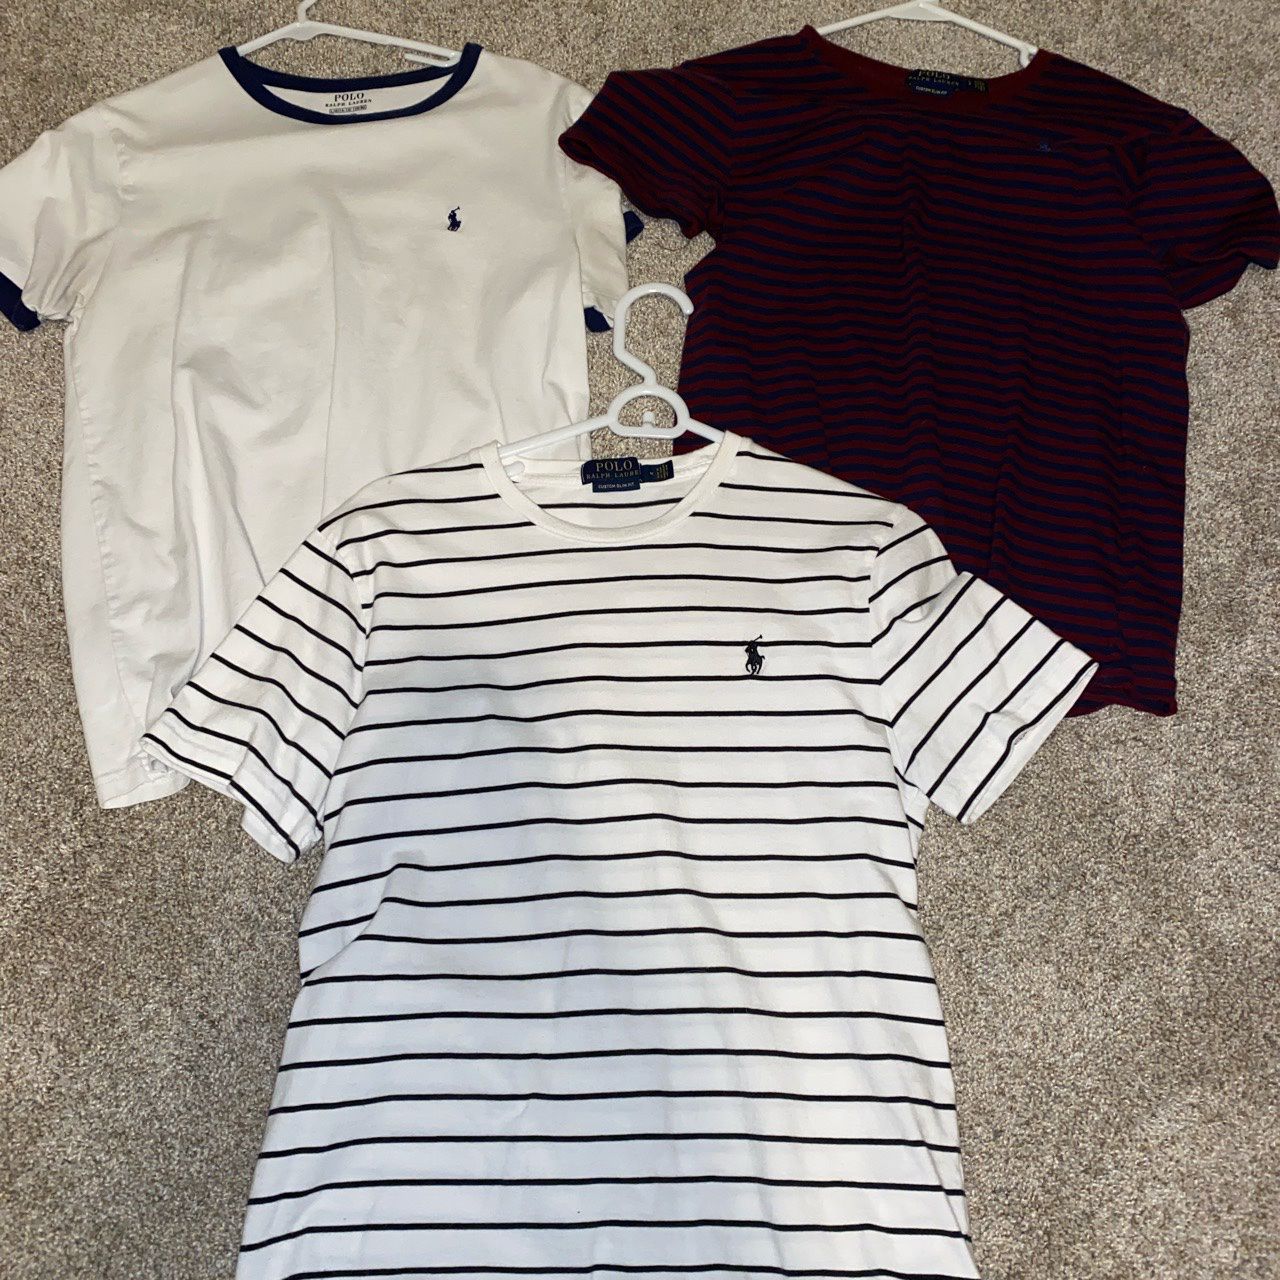 BUY 1 FOR 15; BUY 2 FOR 22; BUY ALL FOR 30 the top 2 are size small, the bottom one is a size medium:)